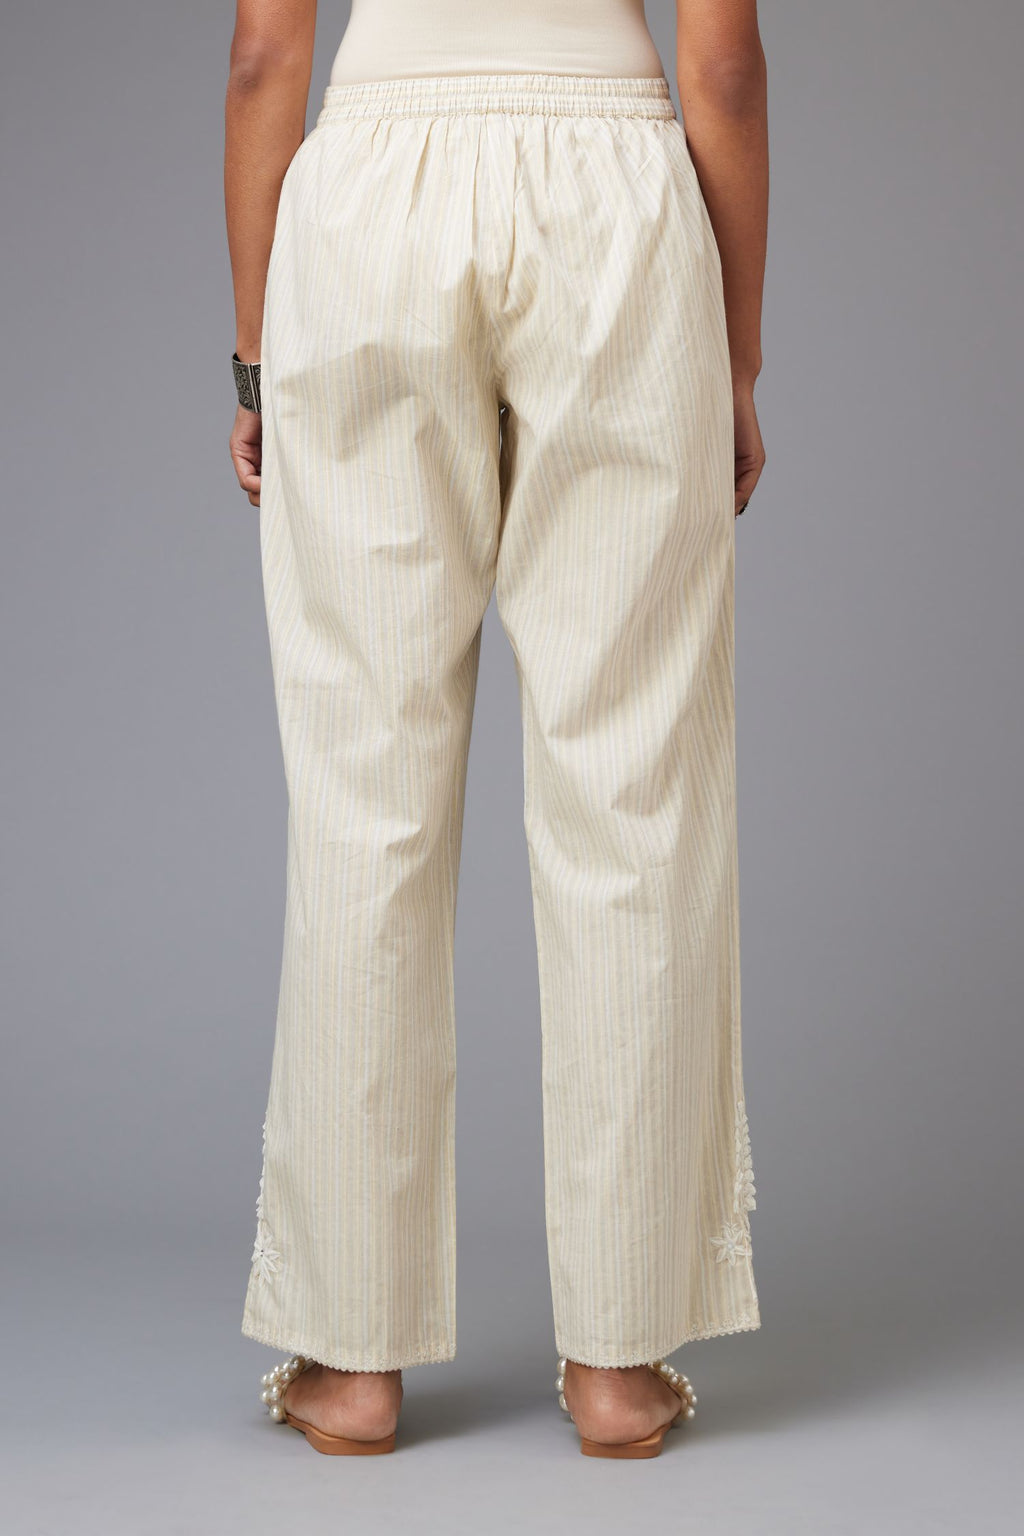 Yellow and grey stripe cotton straight pants with a chiffon embroidered boota at the hem.